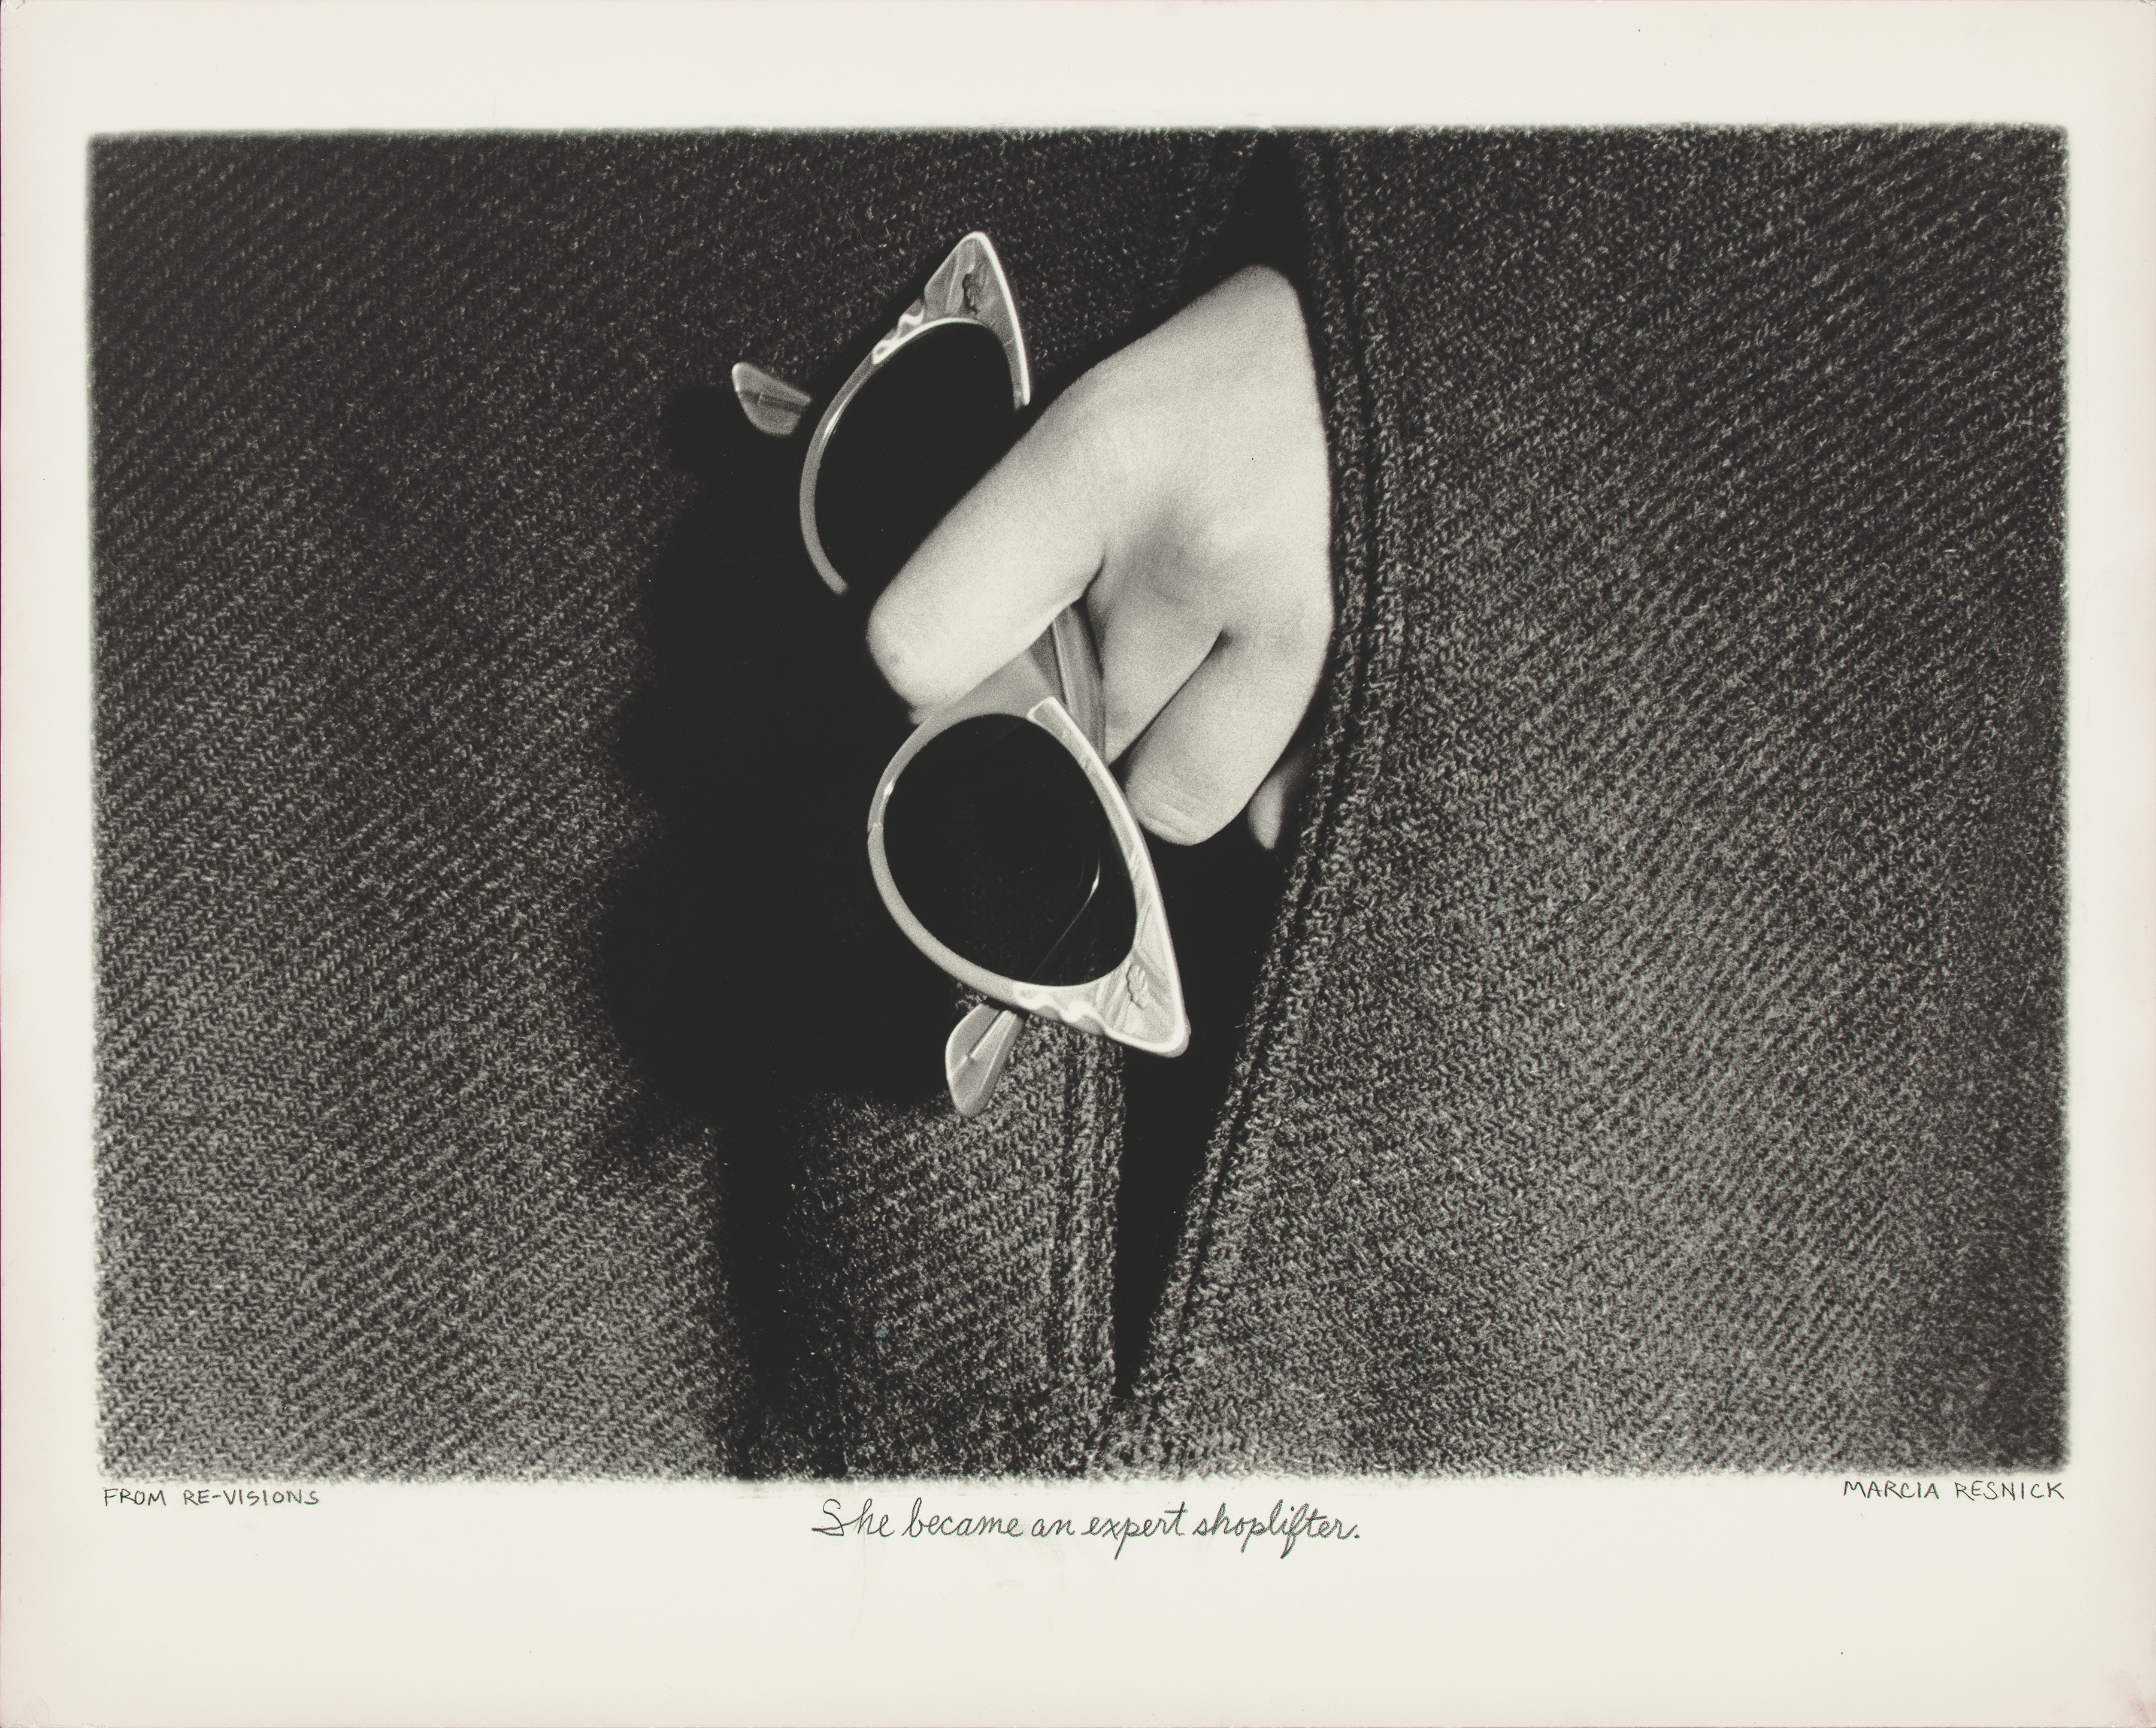 Photograph of a hand holding a pair of sunglasses by Marcia Resnick